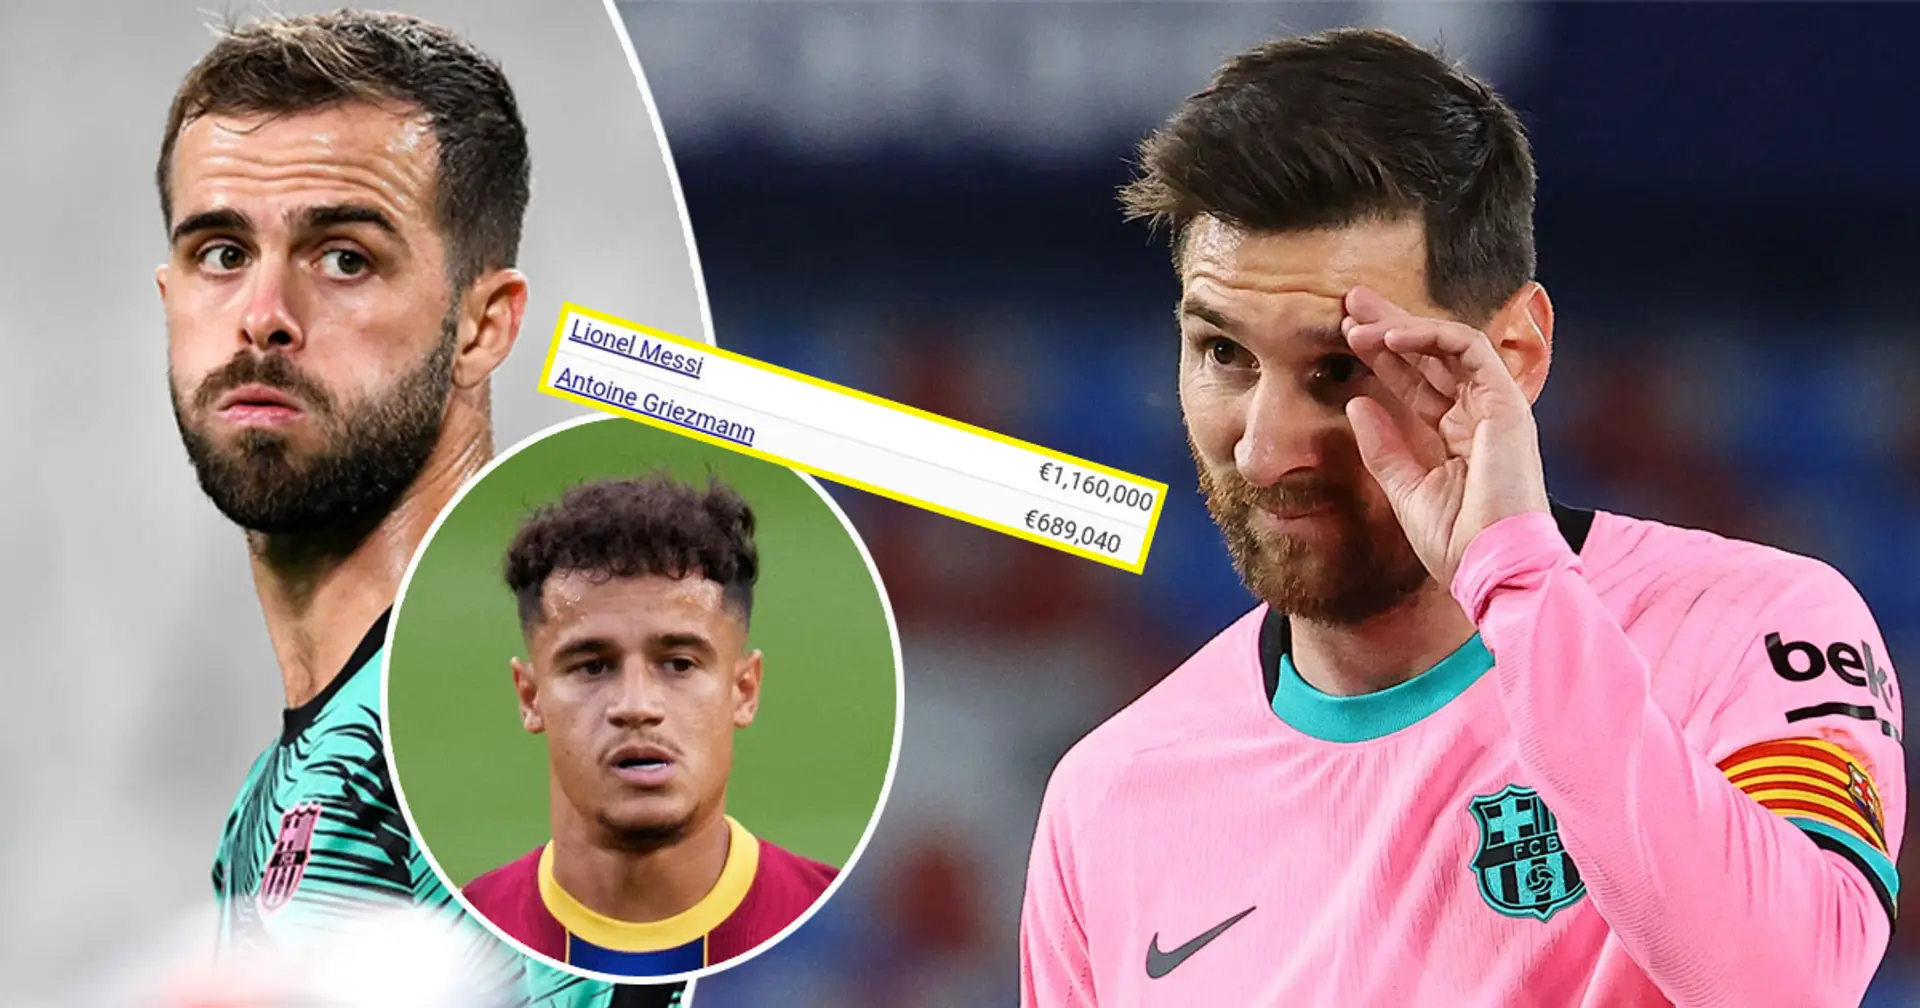 Barcelona squad wages revealed: Messi 1st, Pjanic and Coutinho in top 5